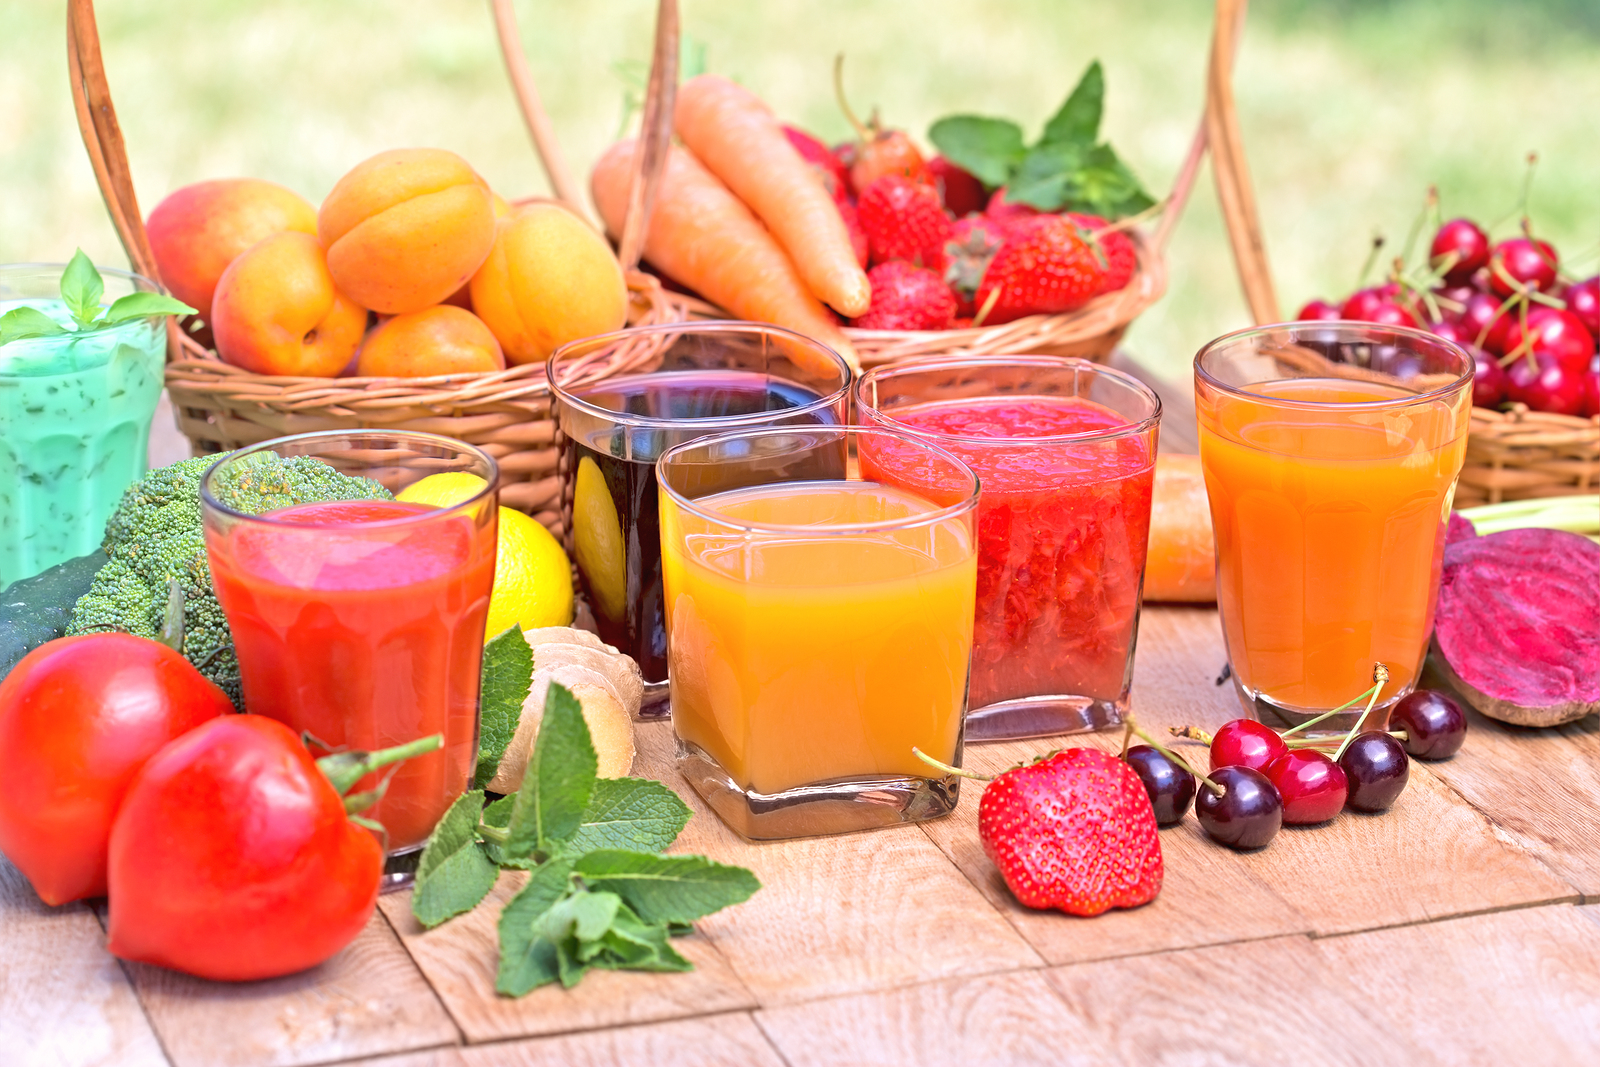 Let’s See What Your Food IQ Is – Can You Get 80% On This Quiz? Fruit juice and vegetable juice